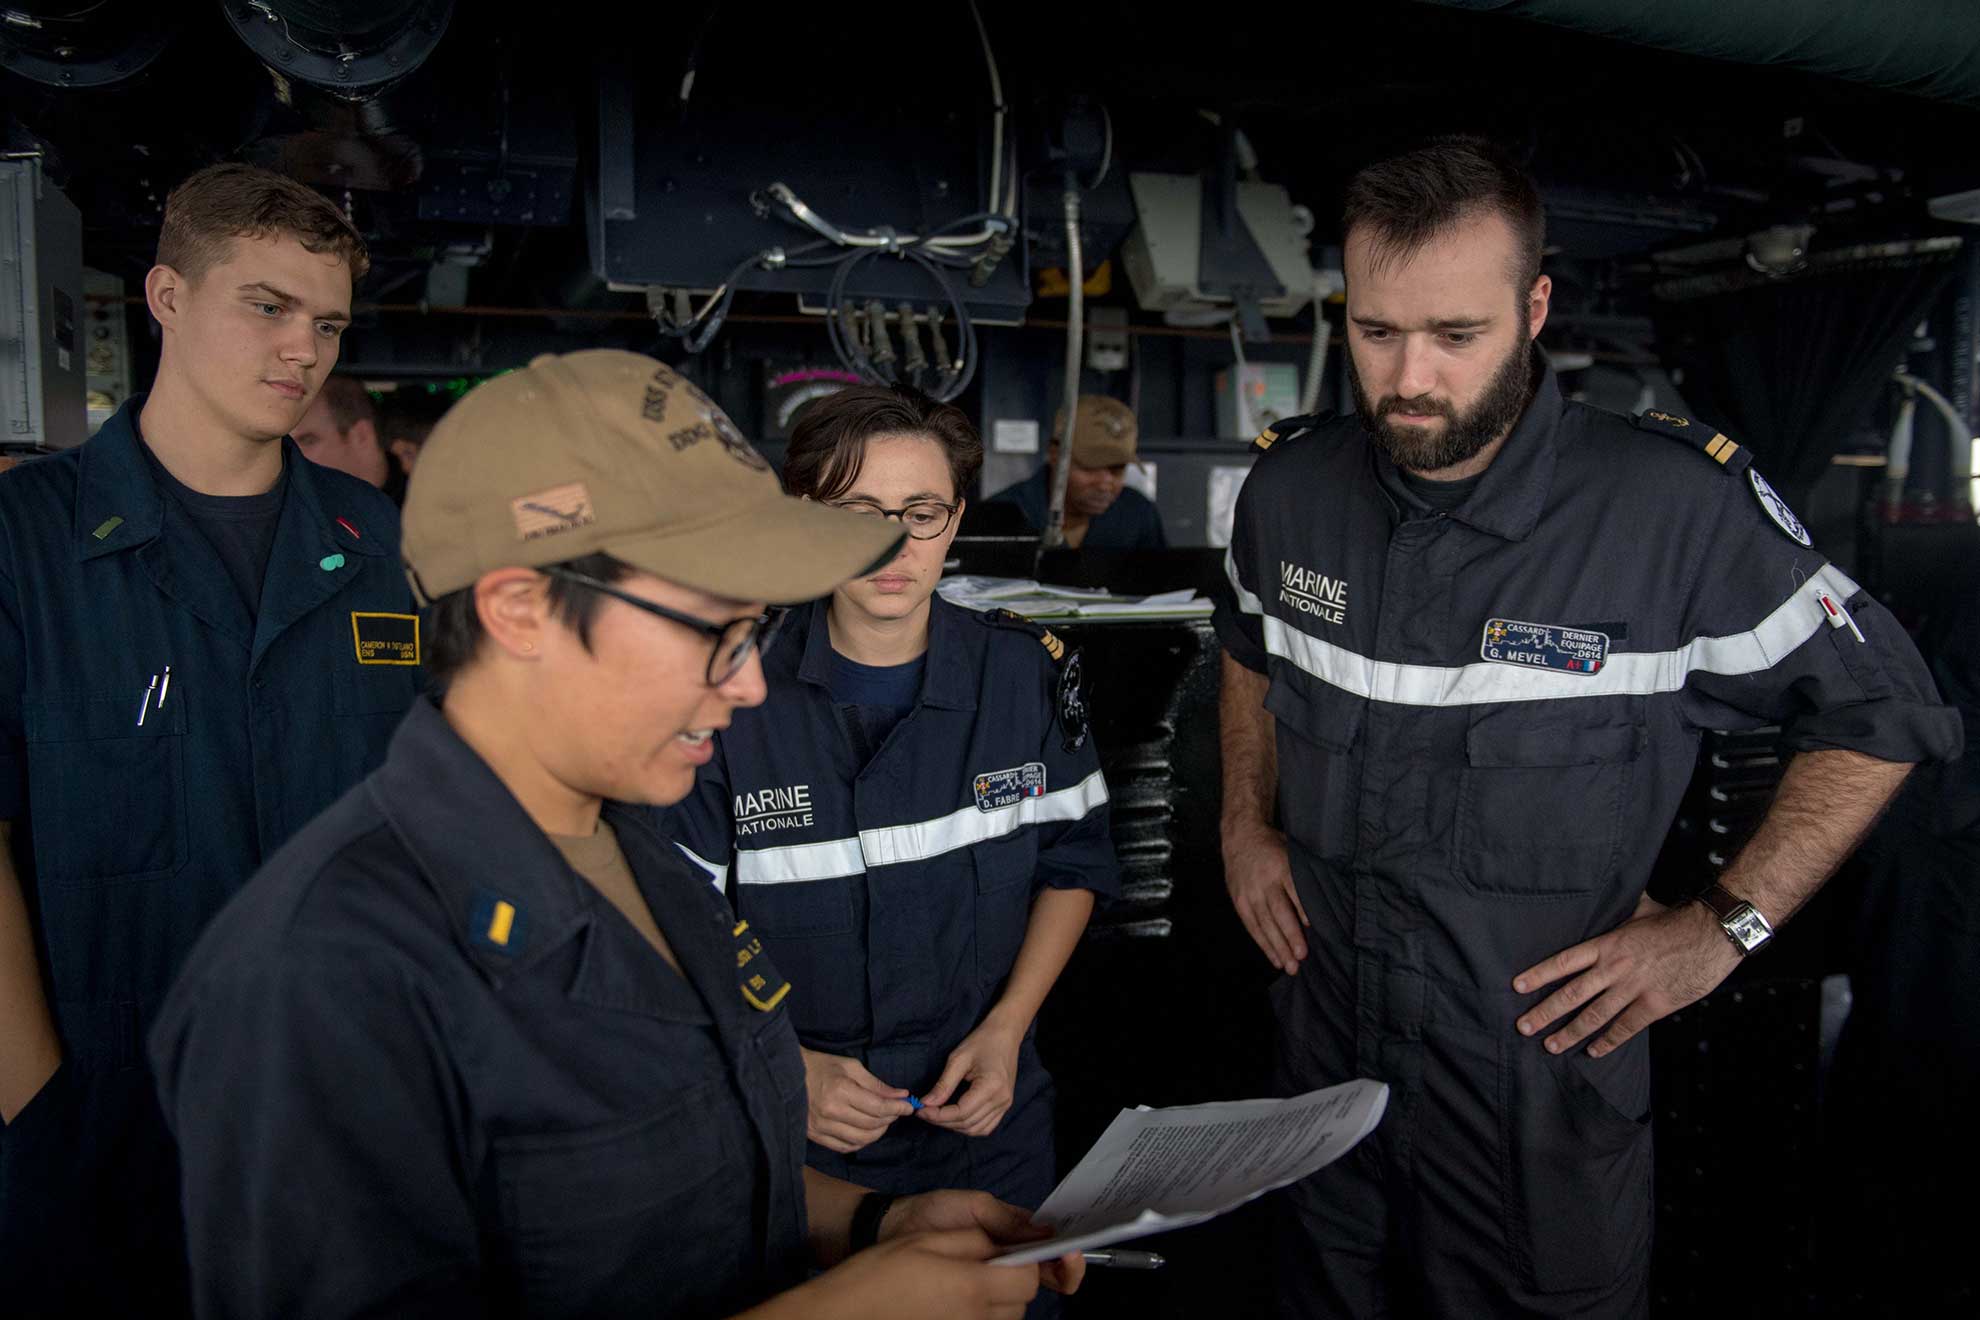 Arabian Sea (Dec. 14, 2018) U.S. Navy Ensign Alison Flynn, from Troutdale, Oregon, speaks with French navy officers from the French navy F70AA-class air defense destroyer FS Cassard (D 614) aboard the guided-missile destroyer USS Stockdale (DDG 106) during anti-submarine warfare exercise SHAREM 195 in the Arabian Sea, Dec. 14, 2018. Stockdale is deployed to the U.S. 5th Fleet area of operations in support of naval operations to ensure maritime stability and security in the Central Region, connecting the Mediterranean and the Pacific through the western Indian Ocean and three strategic choke points -- U.S. Navy photo by MCS2 Abigayle Lutz. -